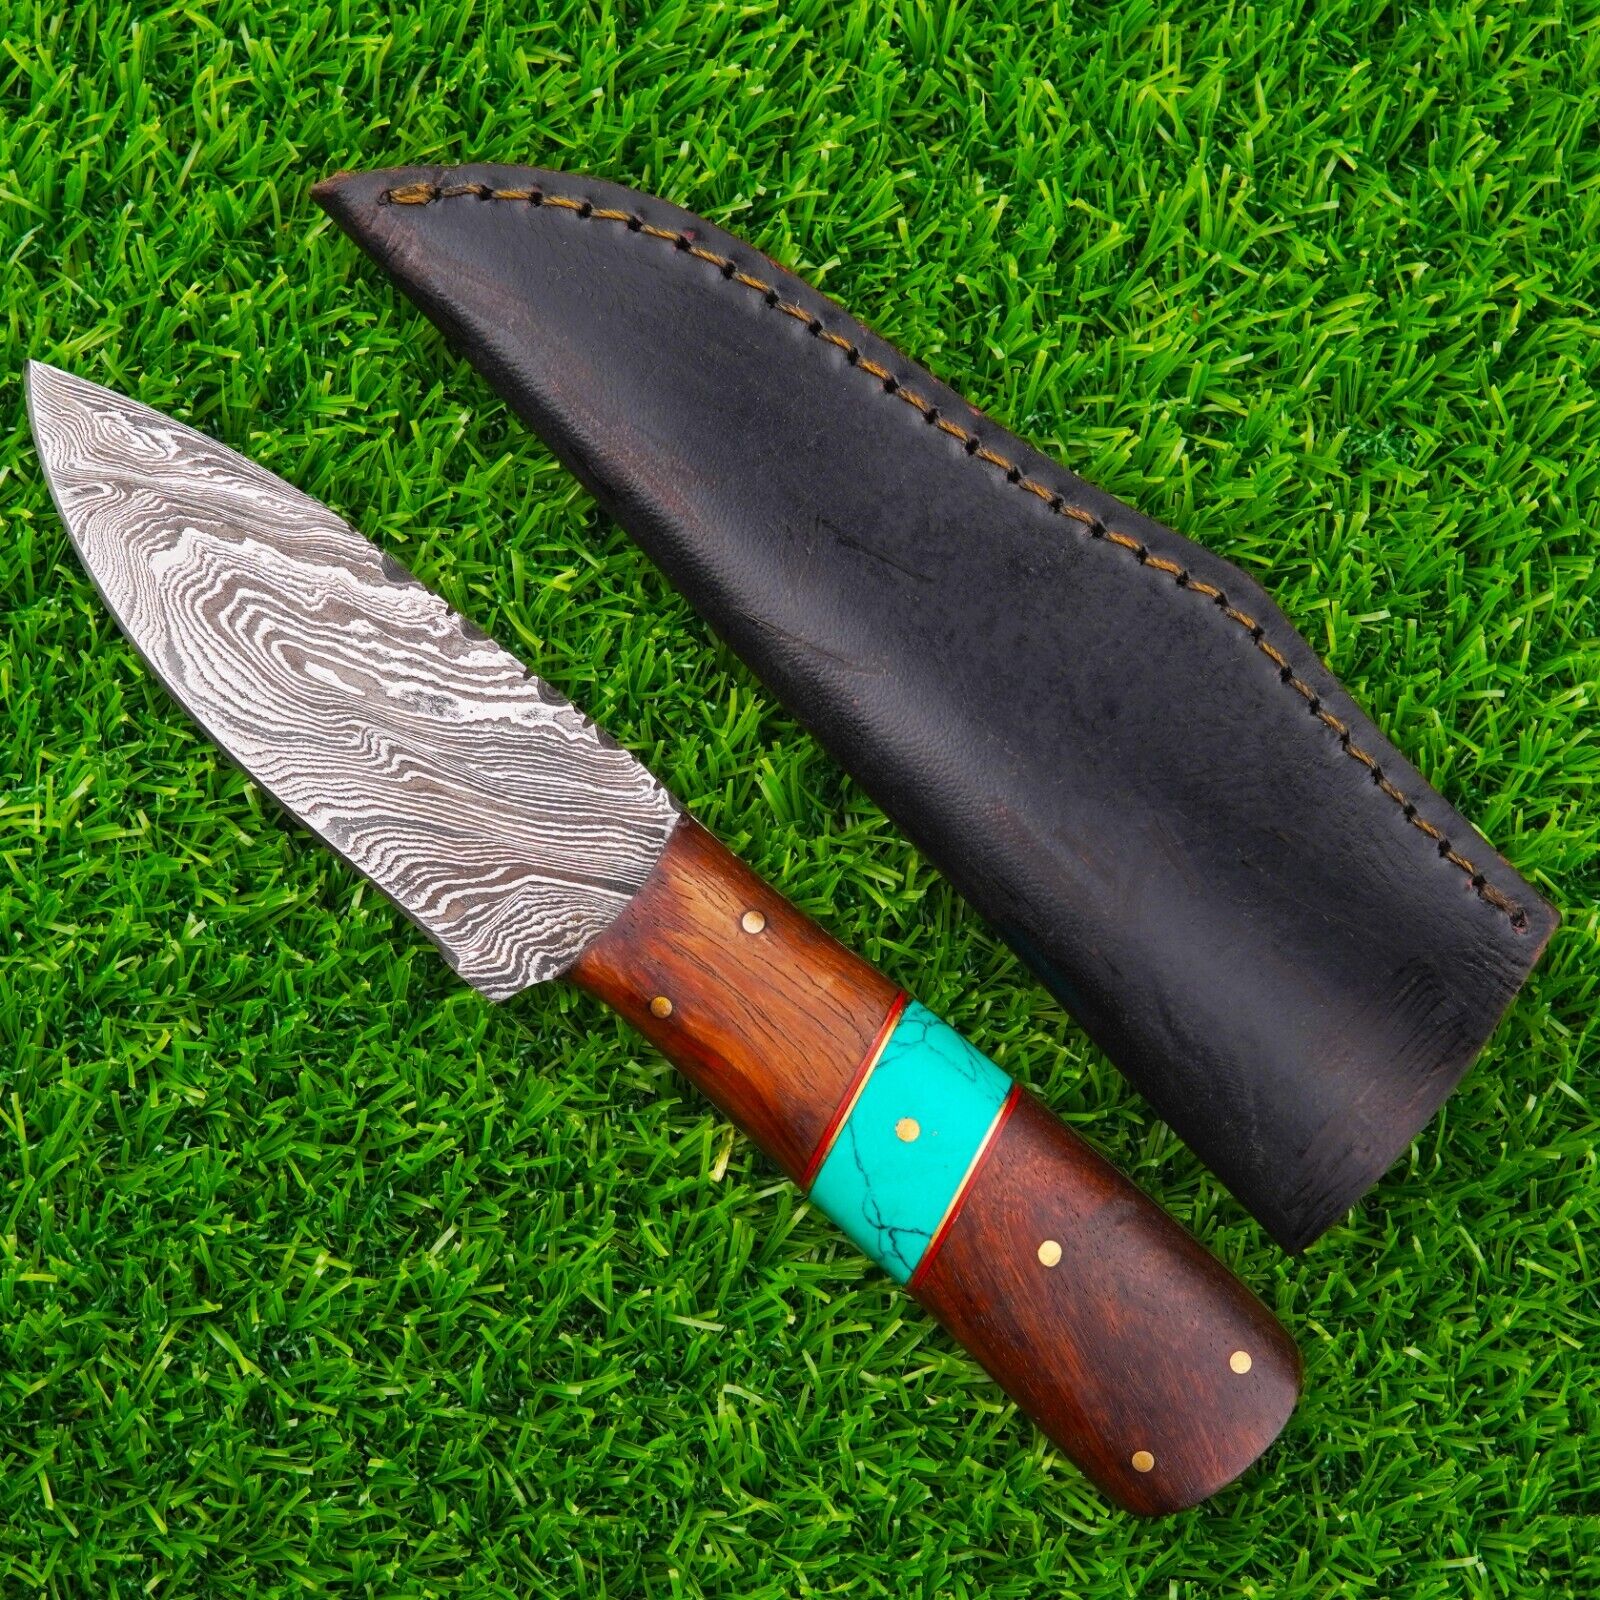 FIXED BLADE HAND MADE DAMASCUS STEEL BEST SURVIVAL HUNTING KNIFE BEST GIFTS